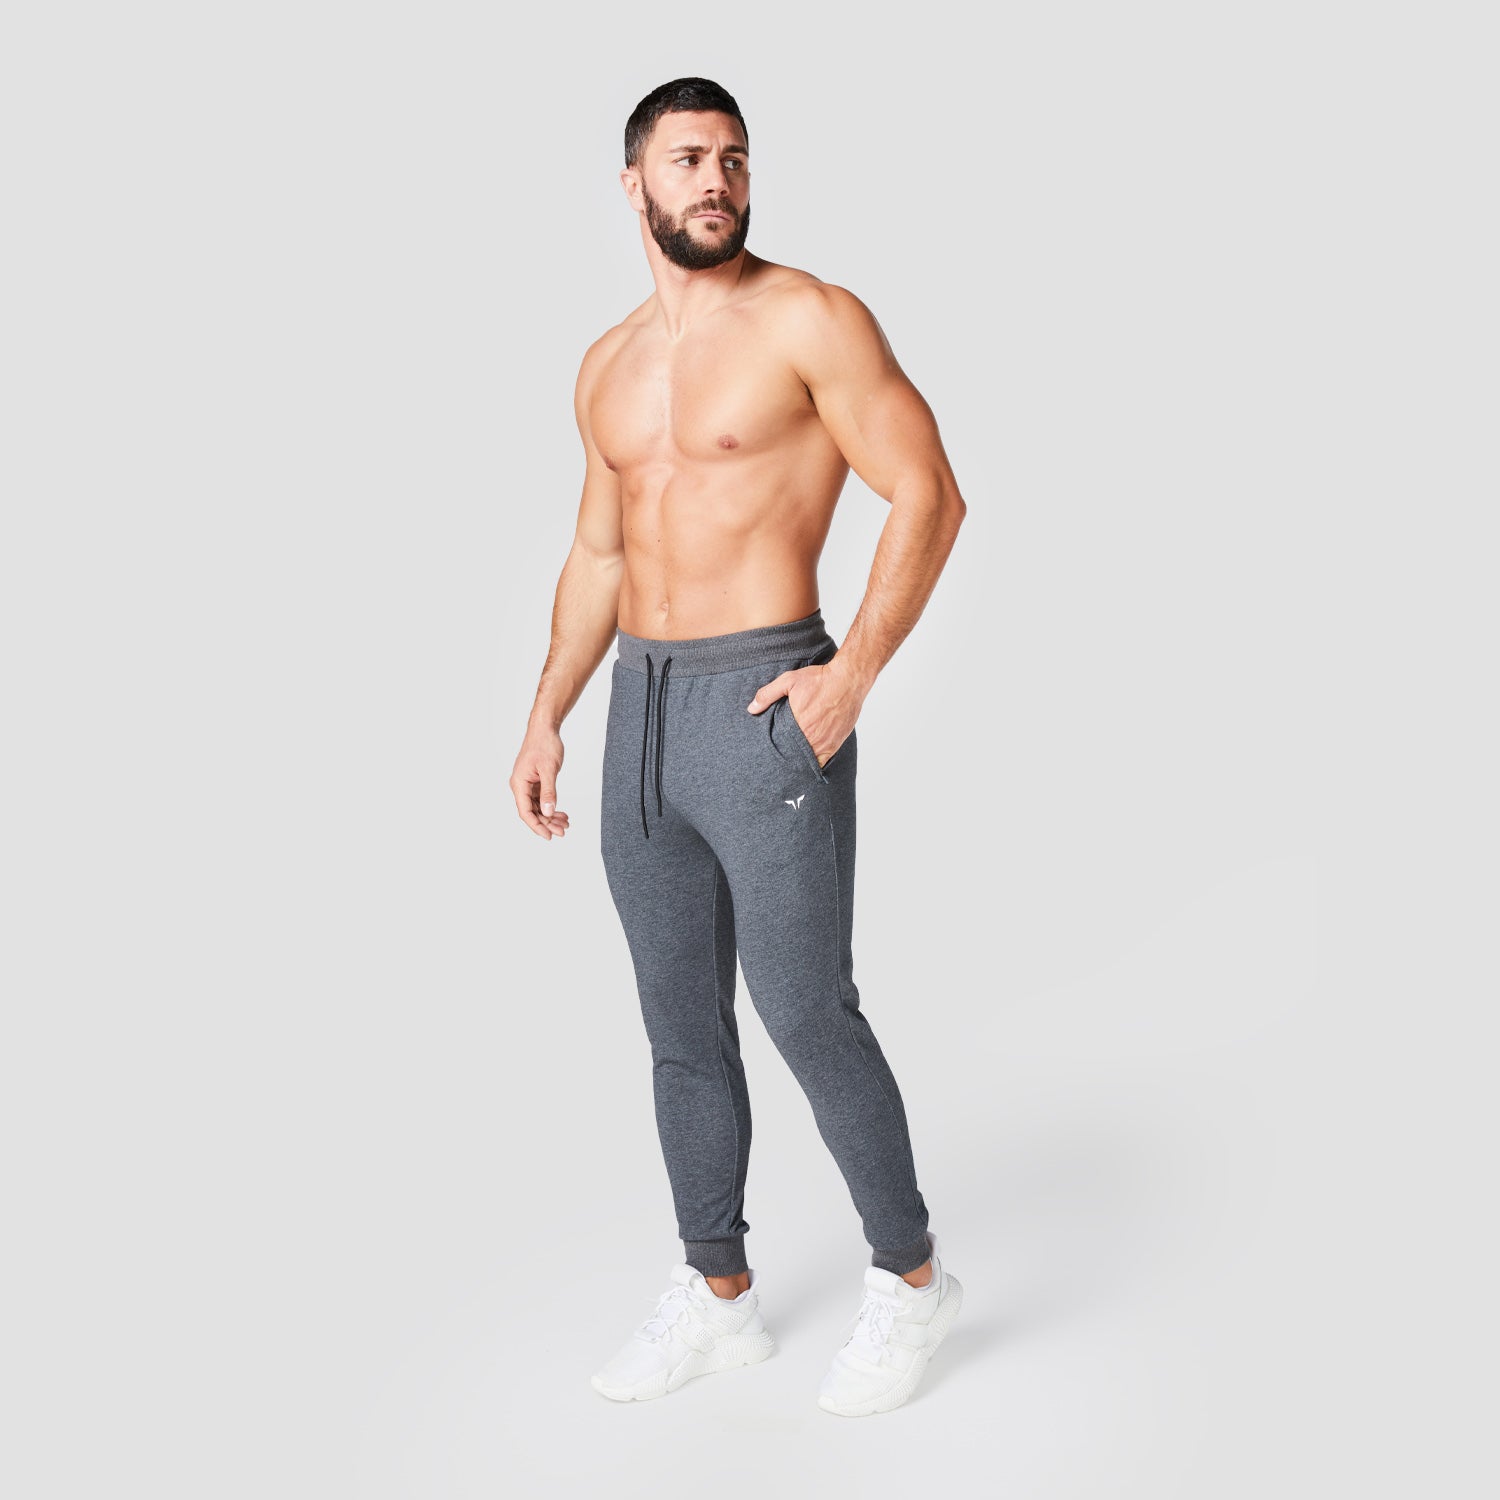 squatwolf-gym-wear-core-cuffed-joggers-charcoal-marl-workout-pants-for-men